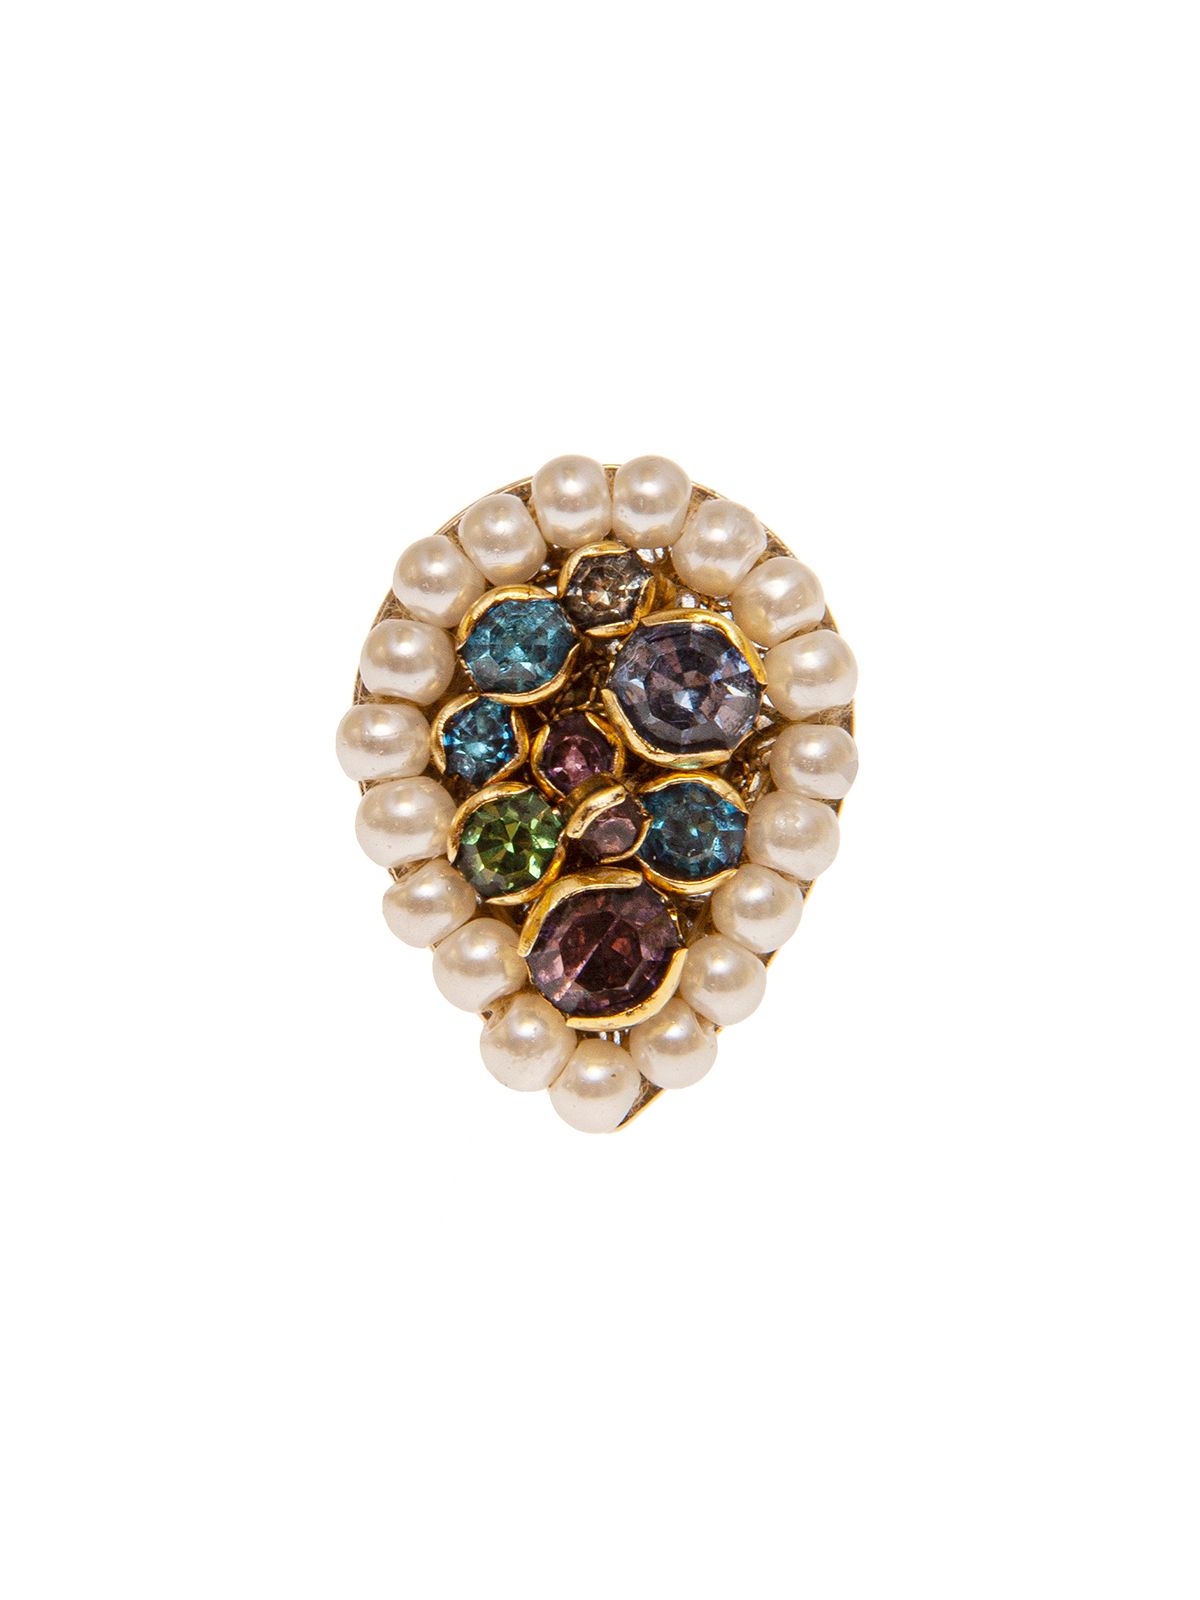 Drop shaped  ring embellished with small pearls and multicolor stones